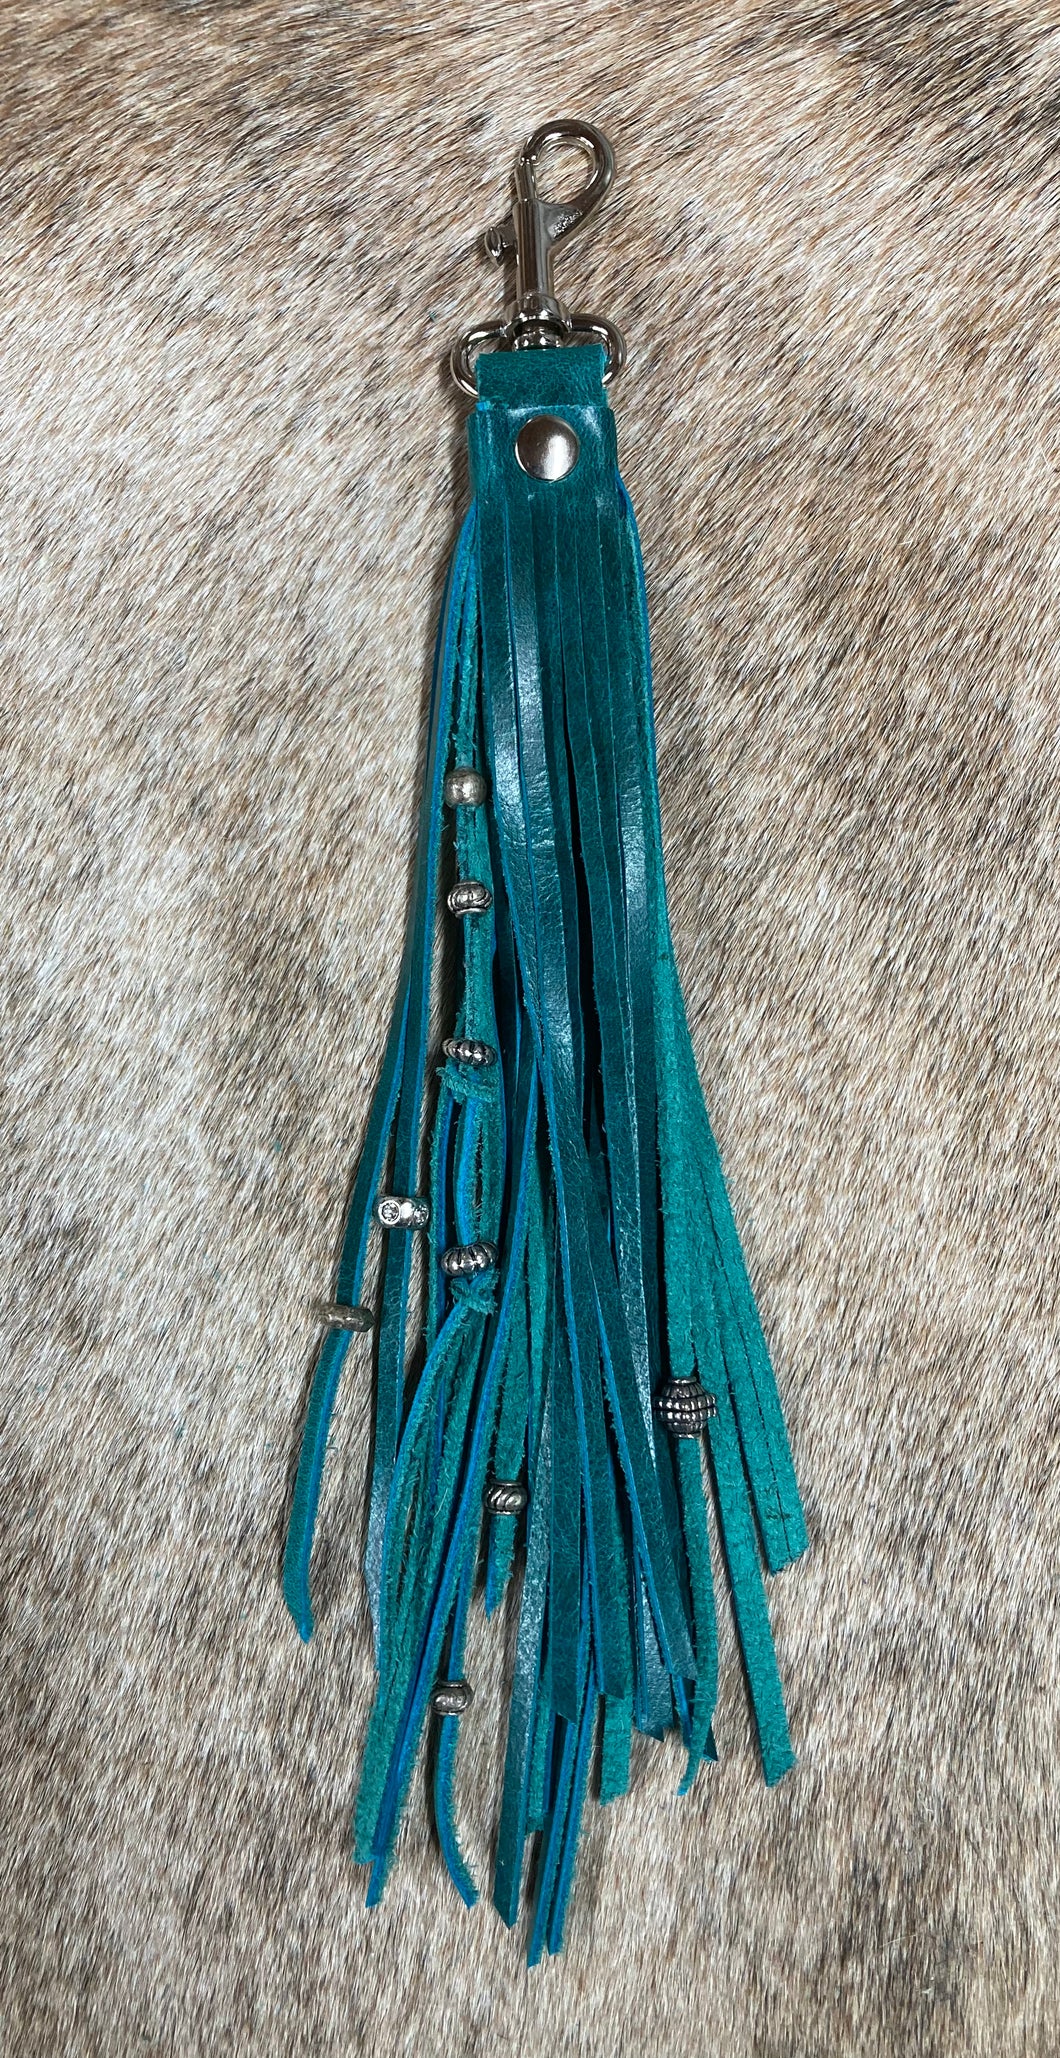 Purse Tassel - Turquoise Leather with Silver Beads